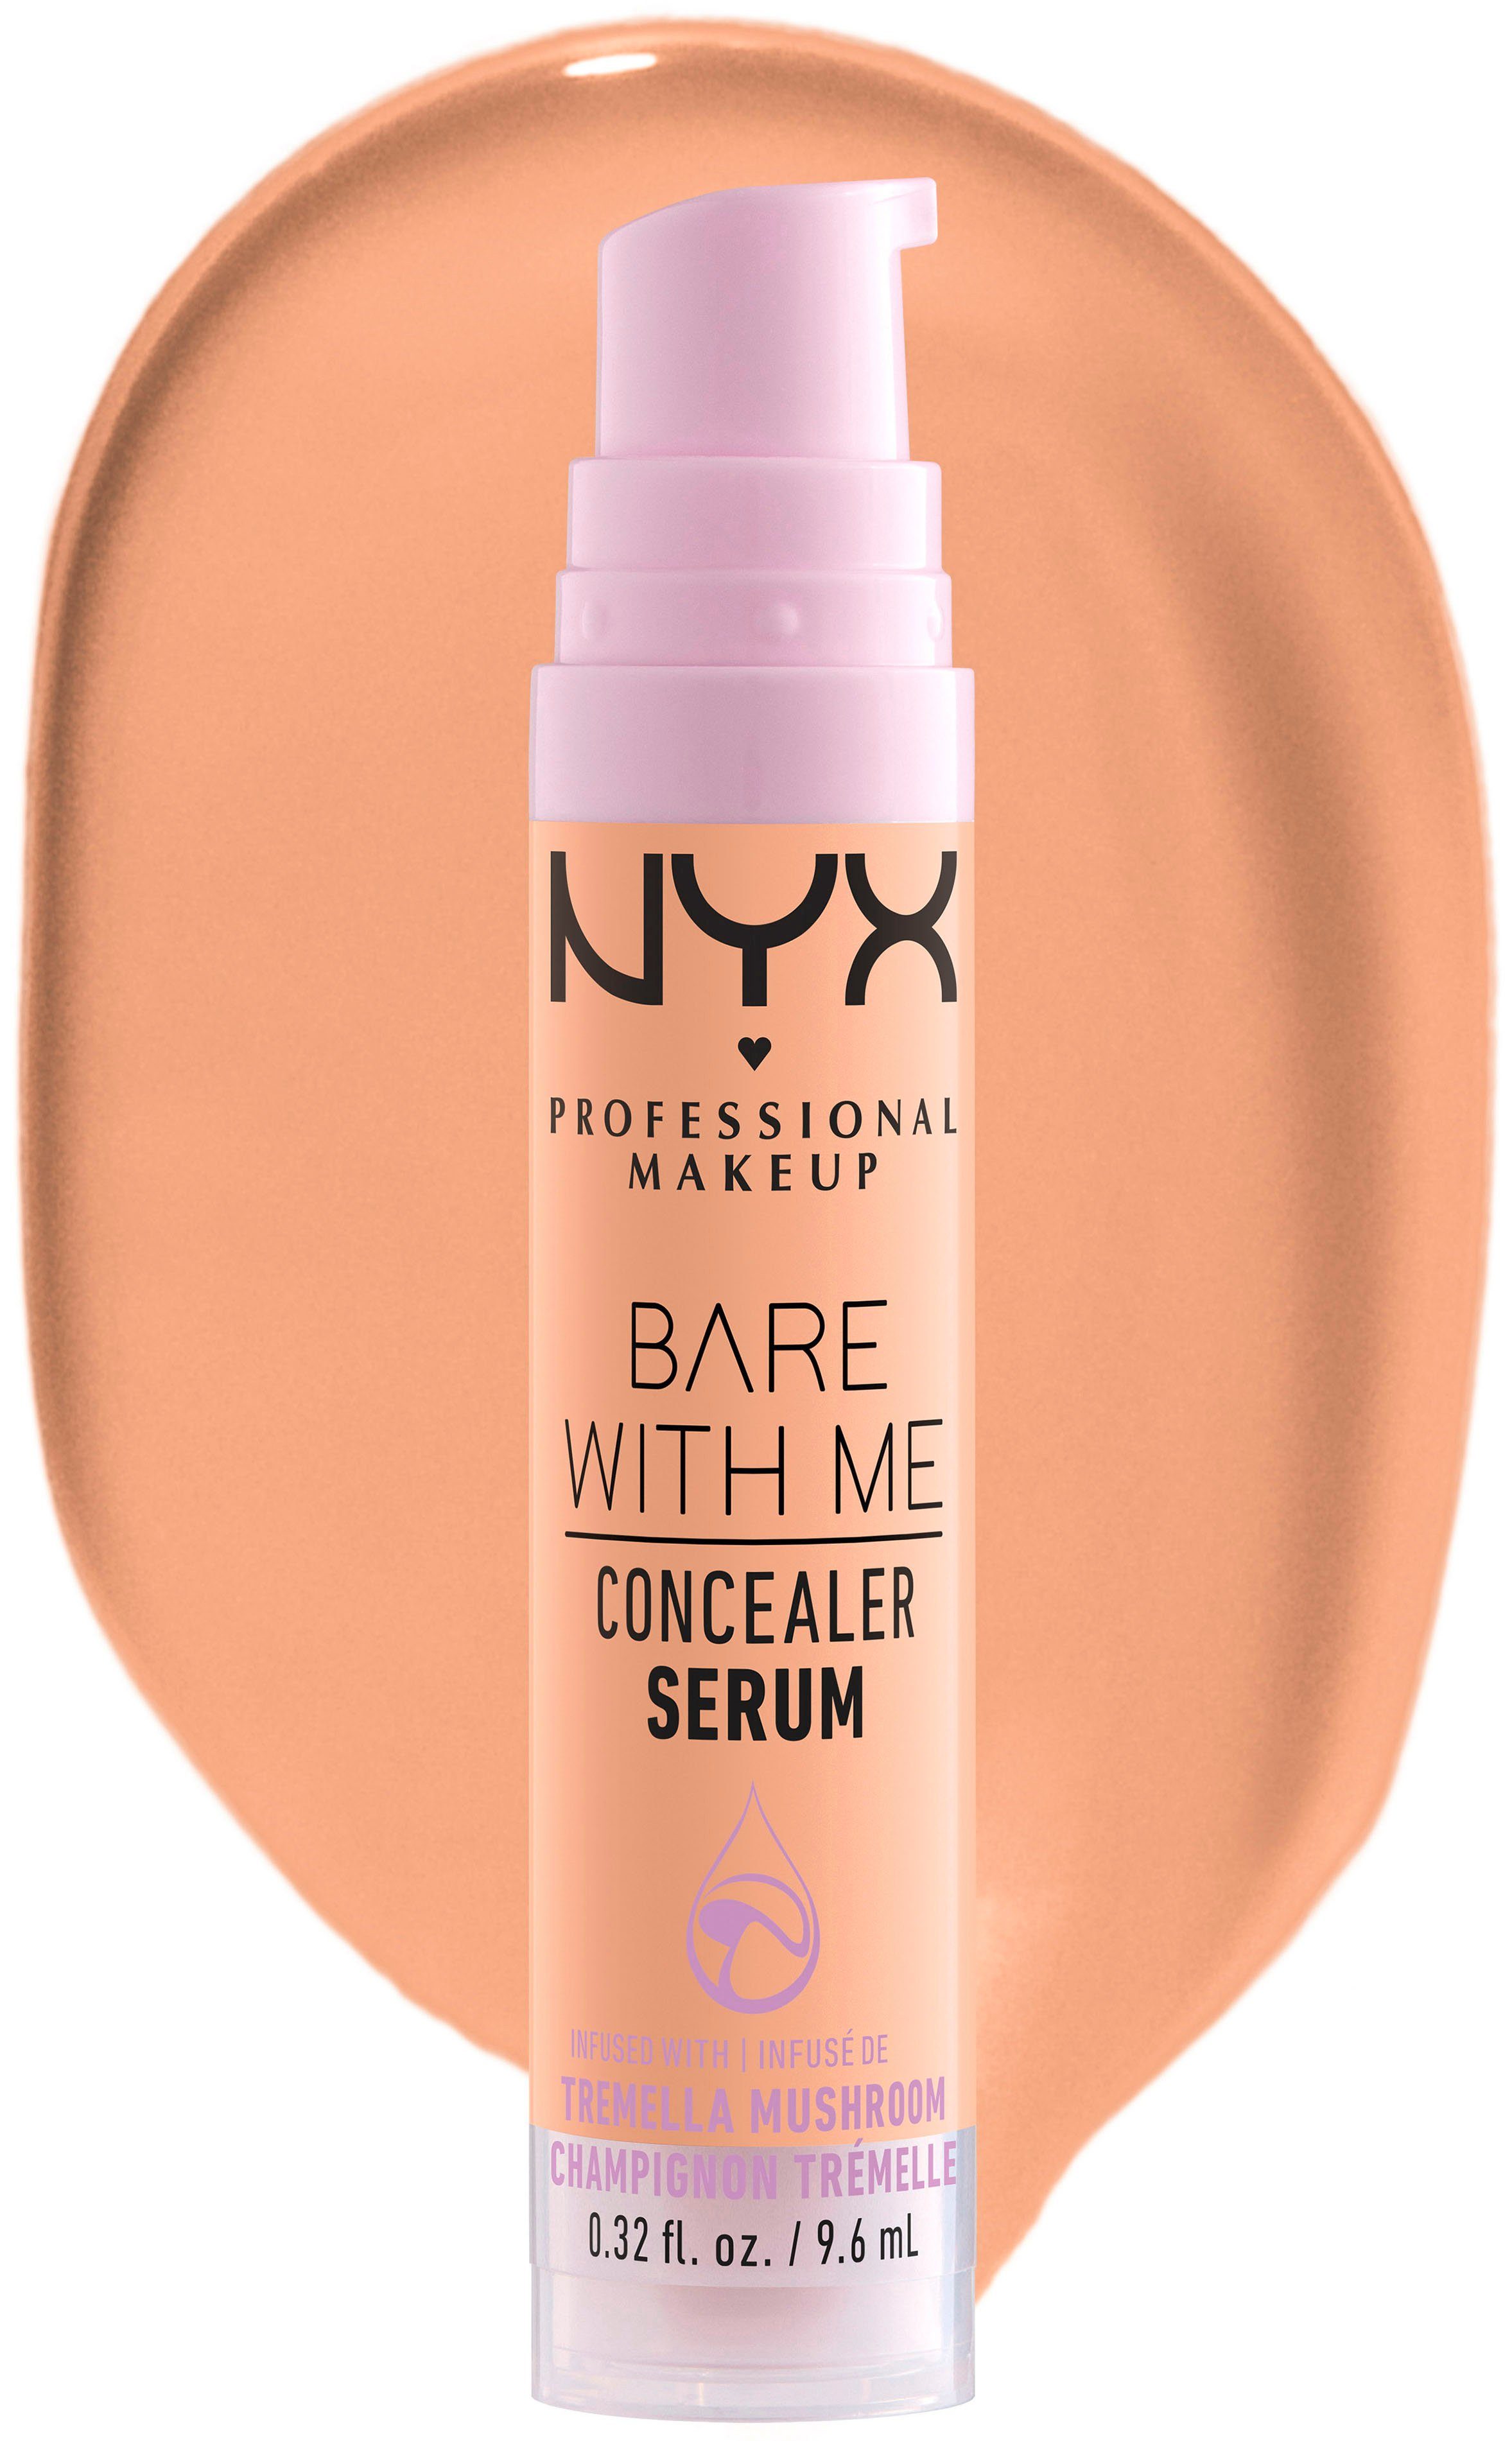 With Bare Concealer Me NYX Serum Concealer